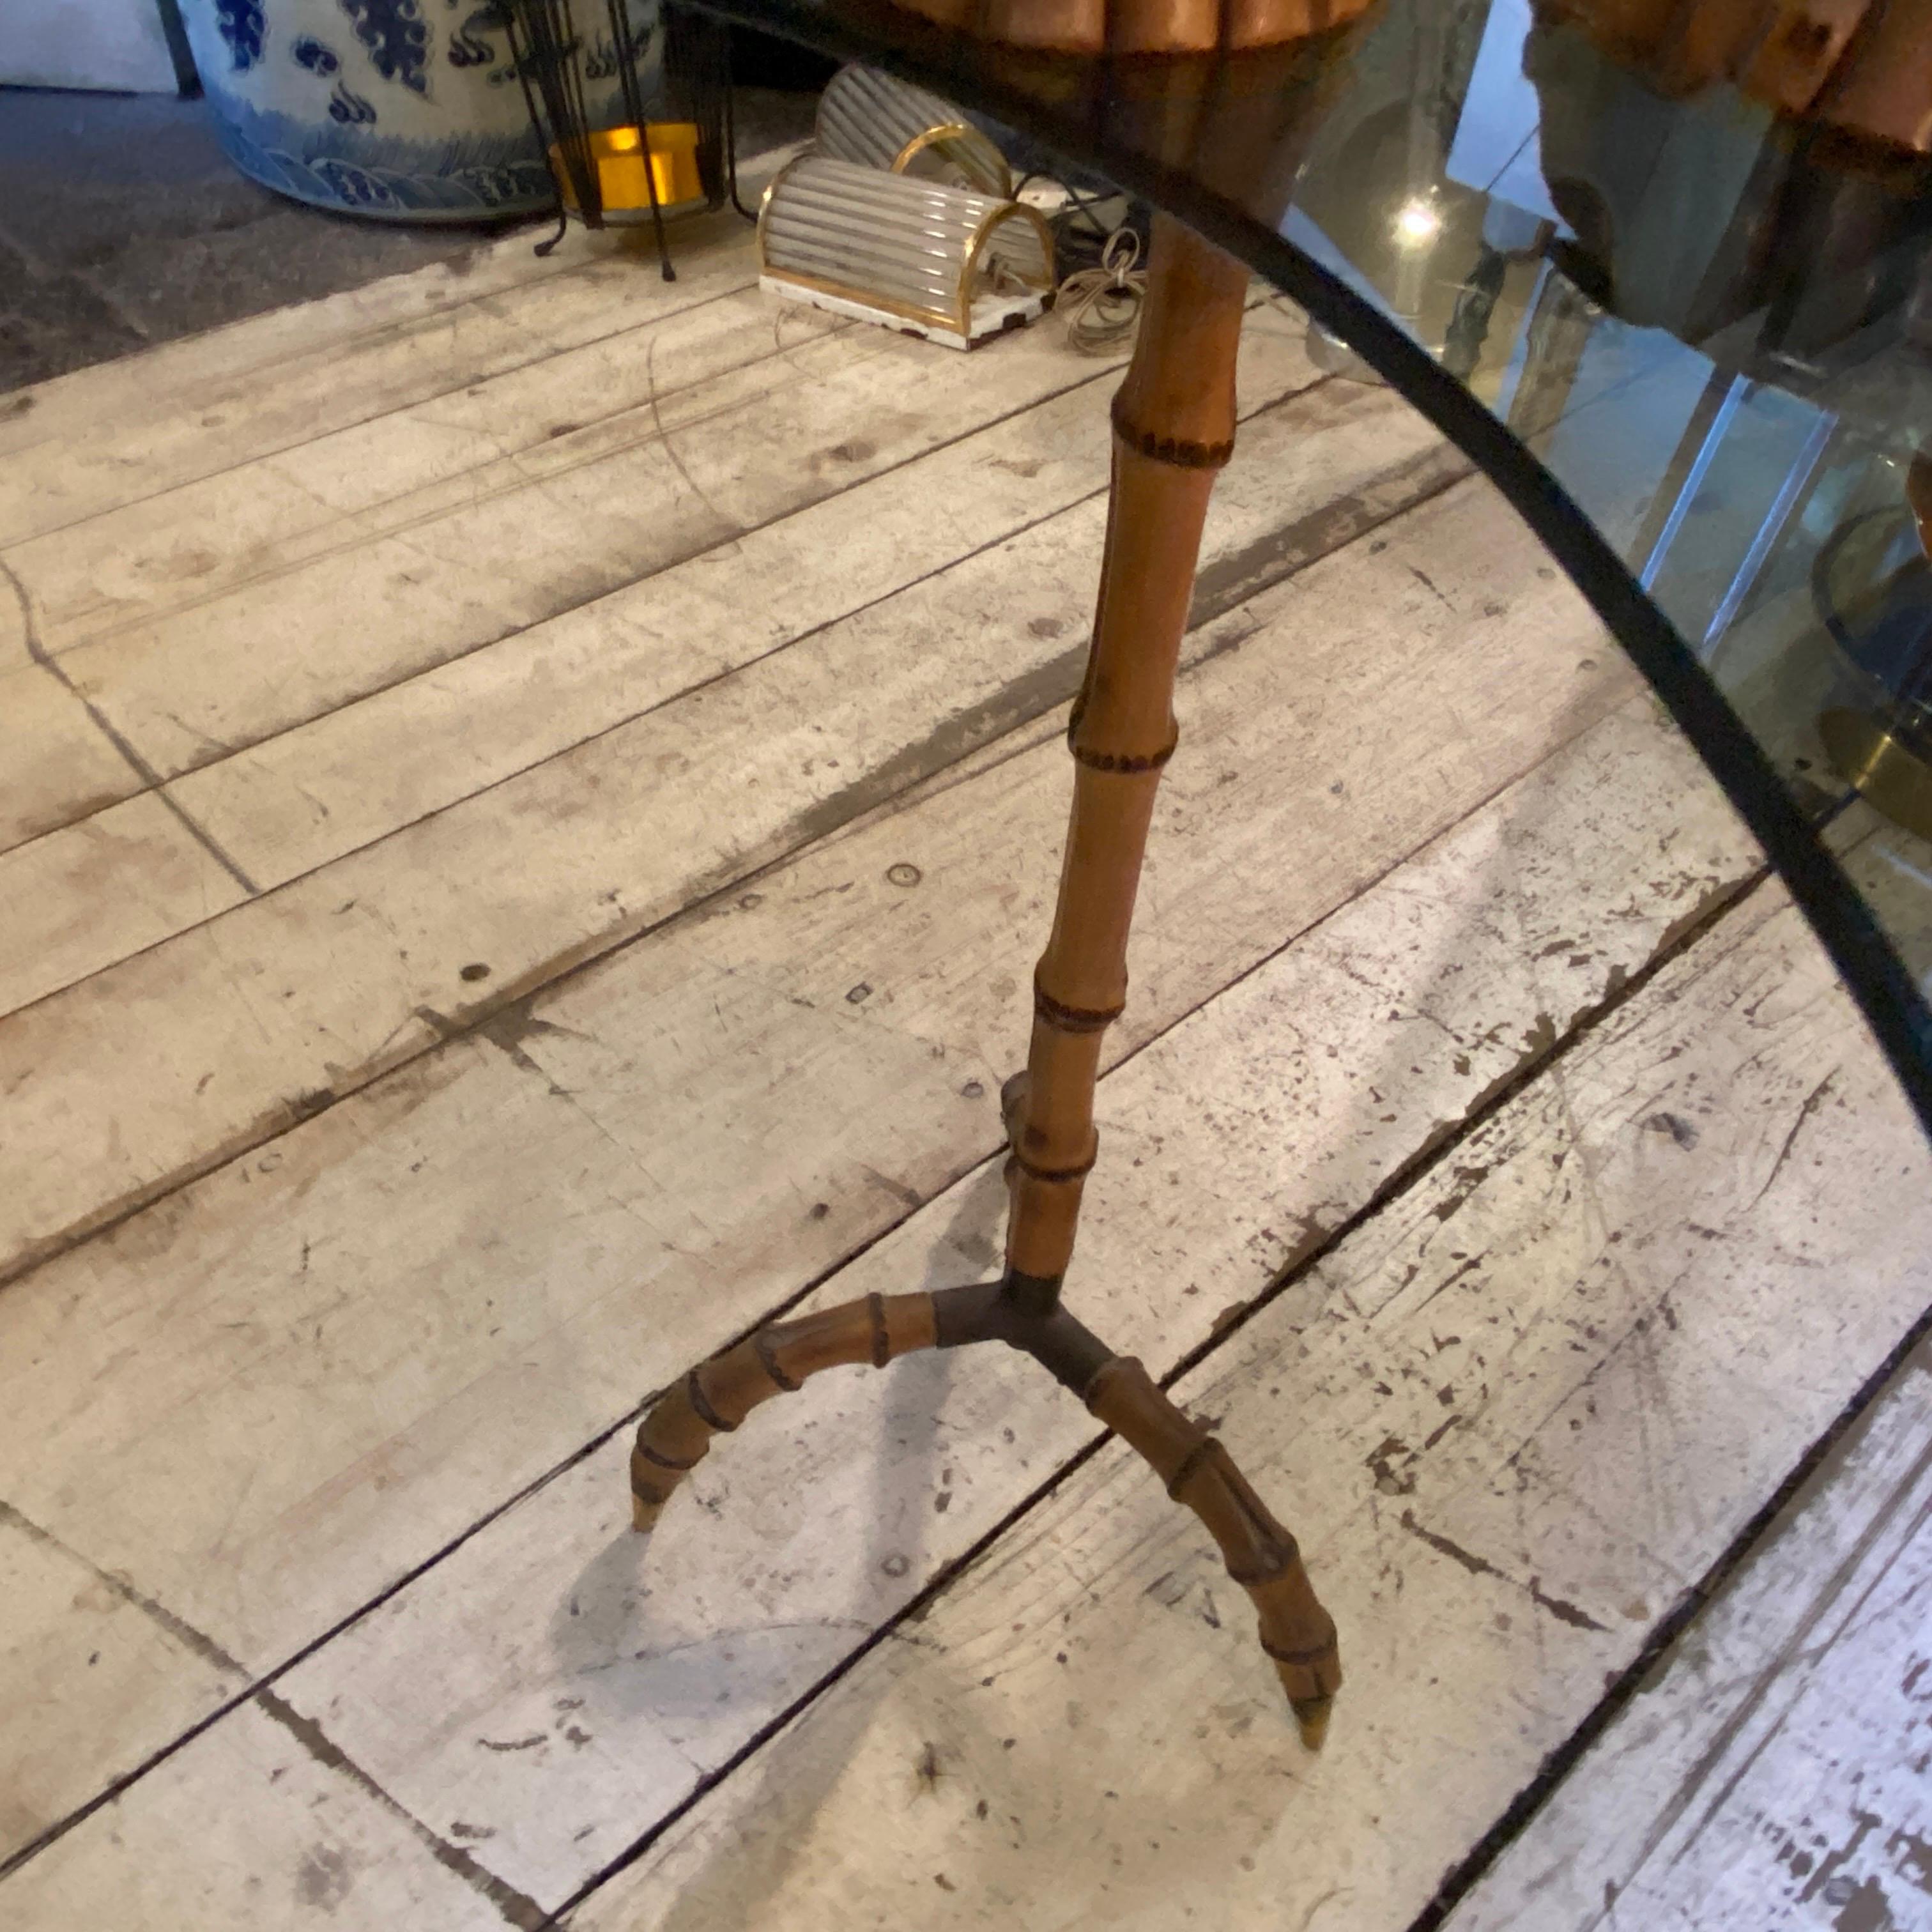 An amazing smoking table with smoking set designed and manufactured in Italy in the style of Gabriella Crespi, brass it's in original patina, bamboo it's in good conditions. Smoking set it's composed by three pieces, the glass it has a particular